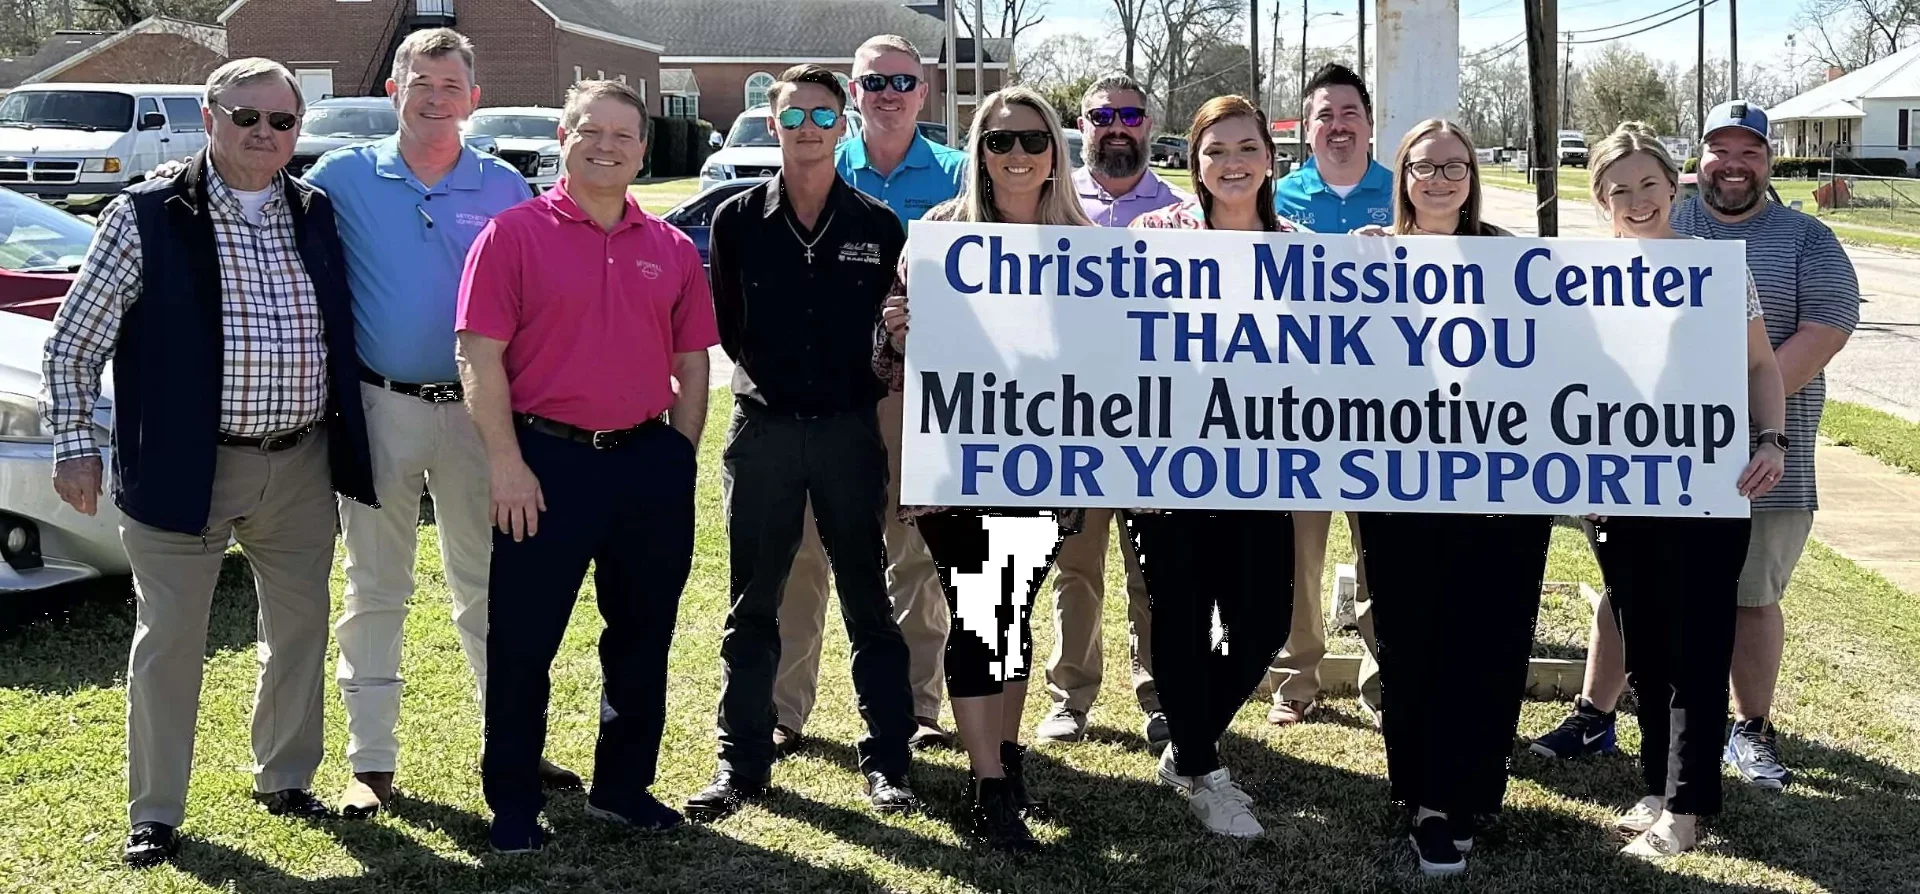  Mitchell Automotive Group Helping the Christian